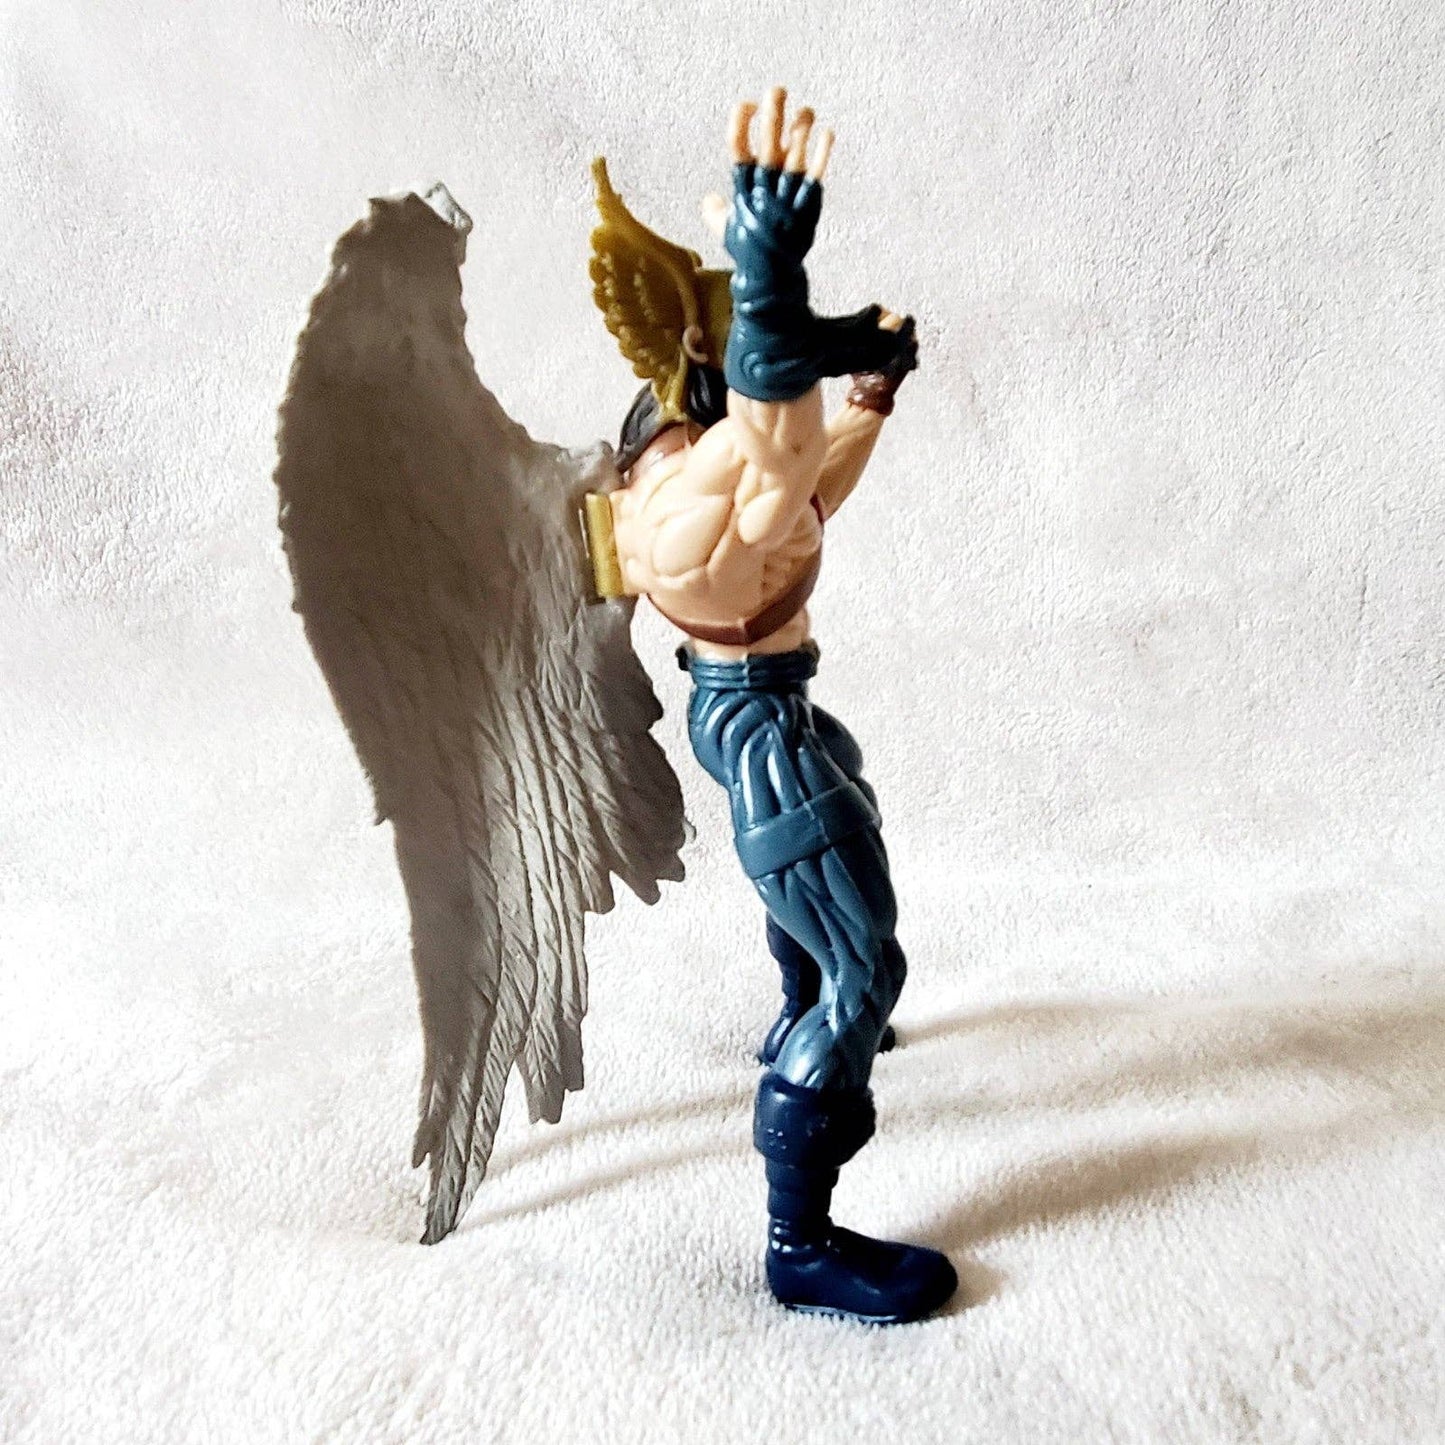 '96 Vintage Hawkman Total Justice League DC. Arms legs & wings are posable.